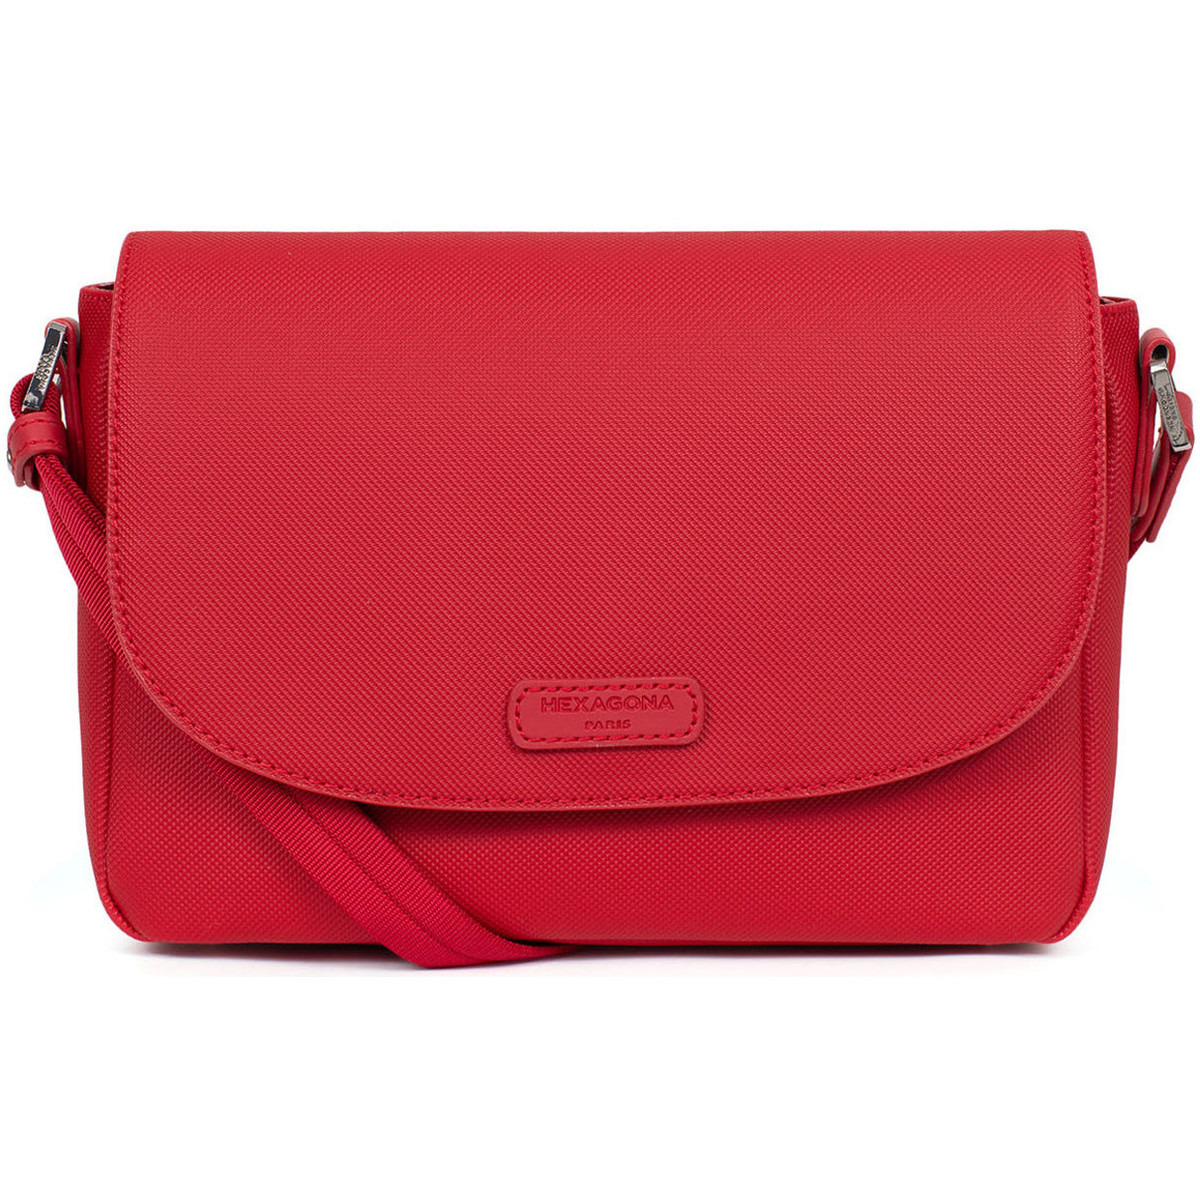 Woman Shoulder Bag in Red by Spartoo GOOFASH